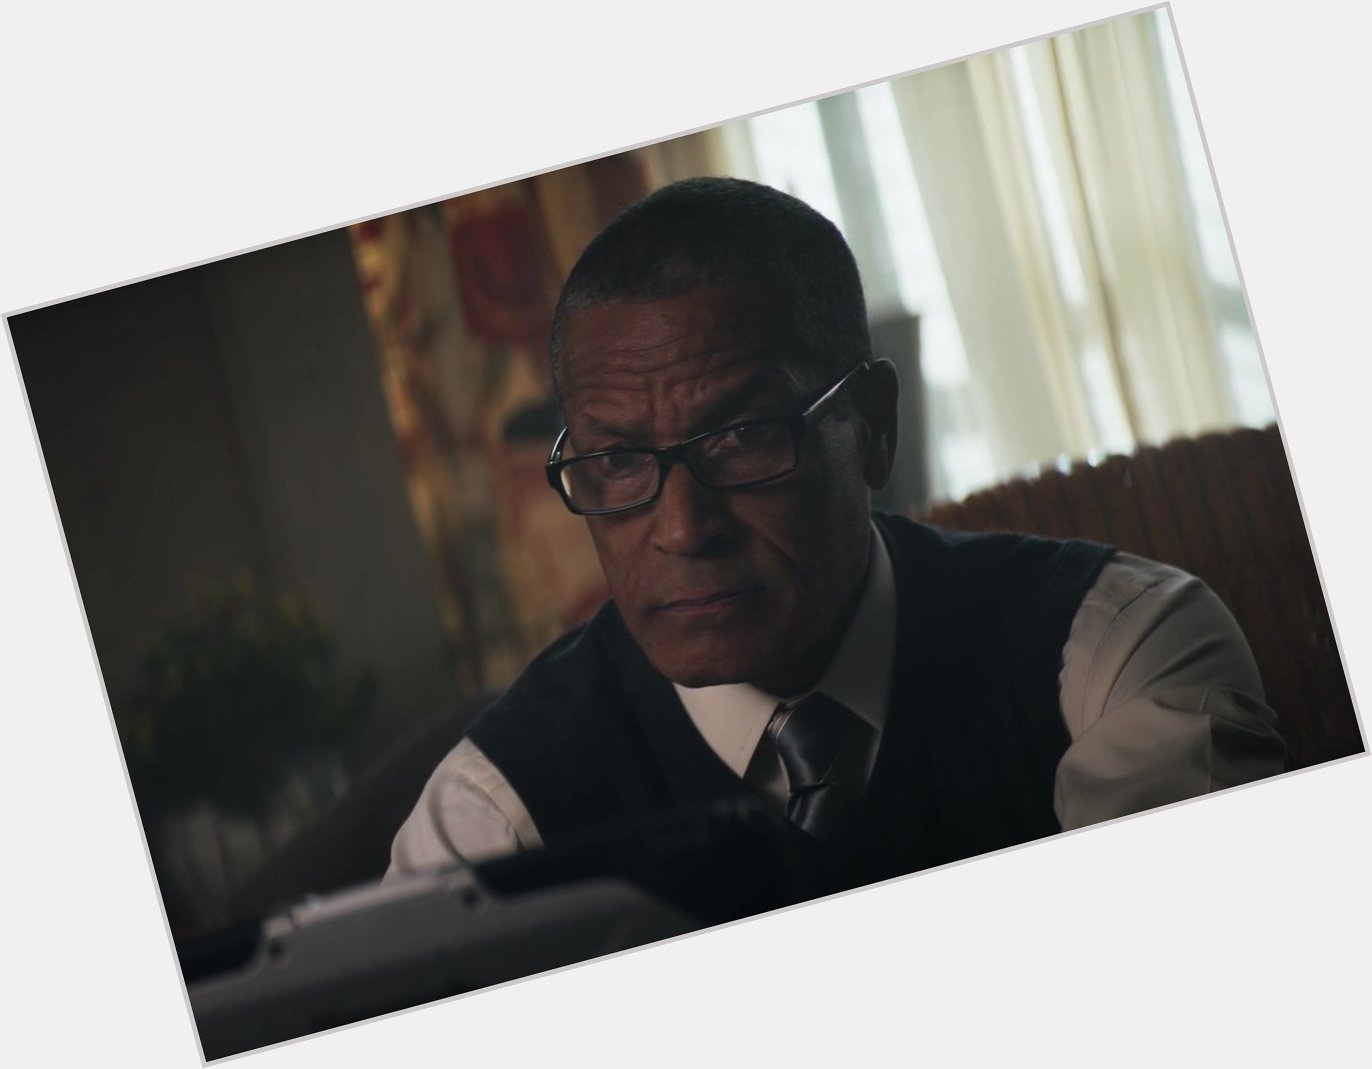 Happy birthday to our Silas Stone, Phil Morris. Thank you for giving us emotional moments in Doom Patrol 